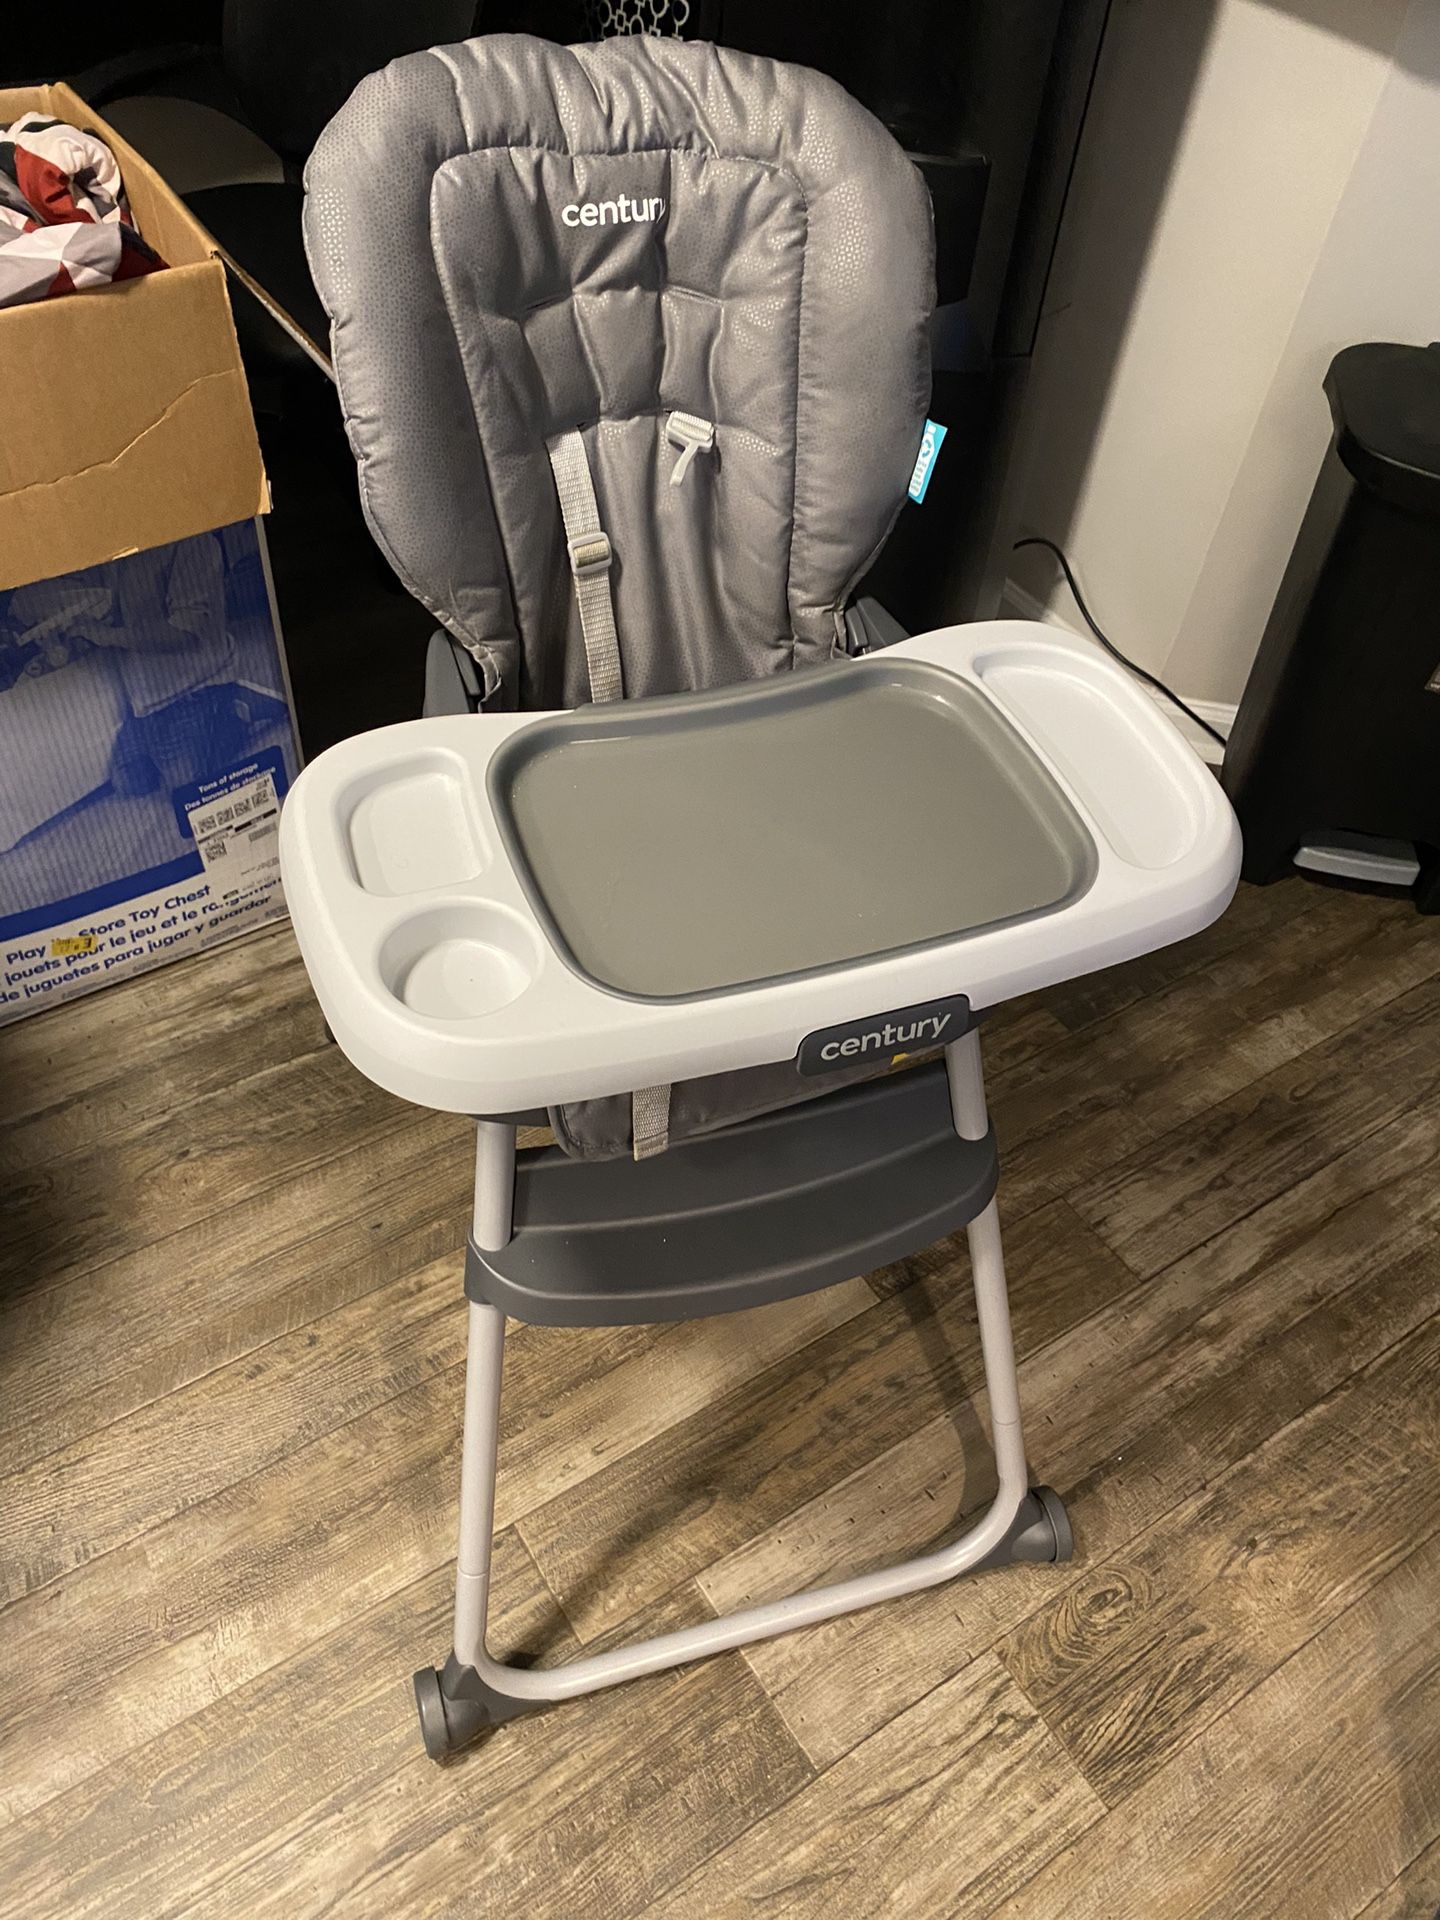 Century 4-in-1 High chair For Sale!